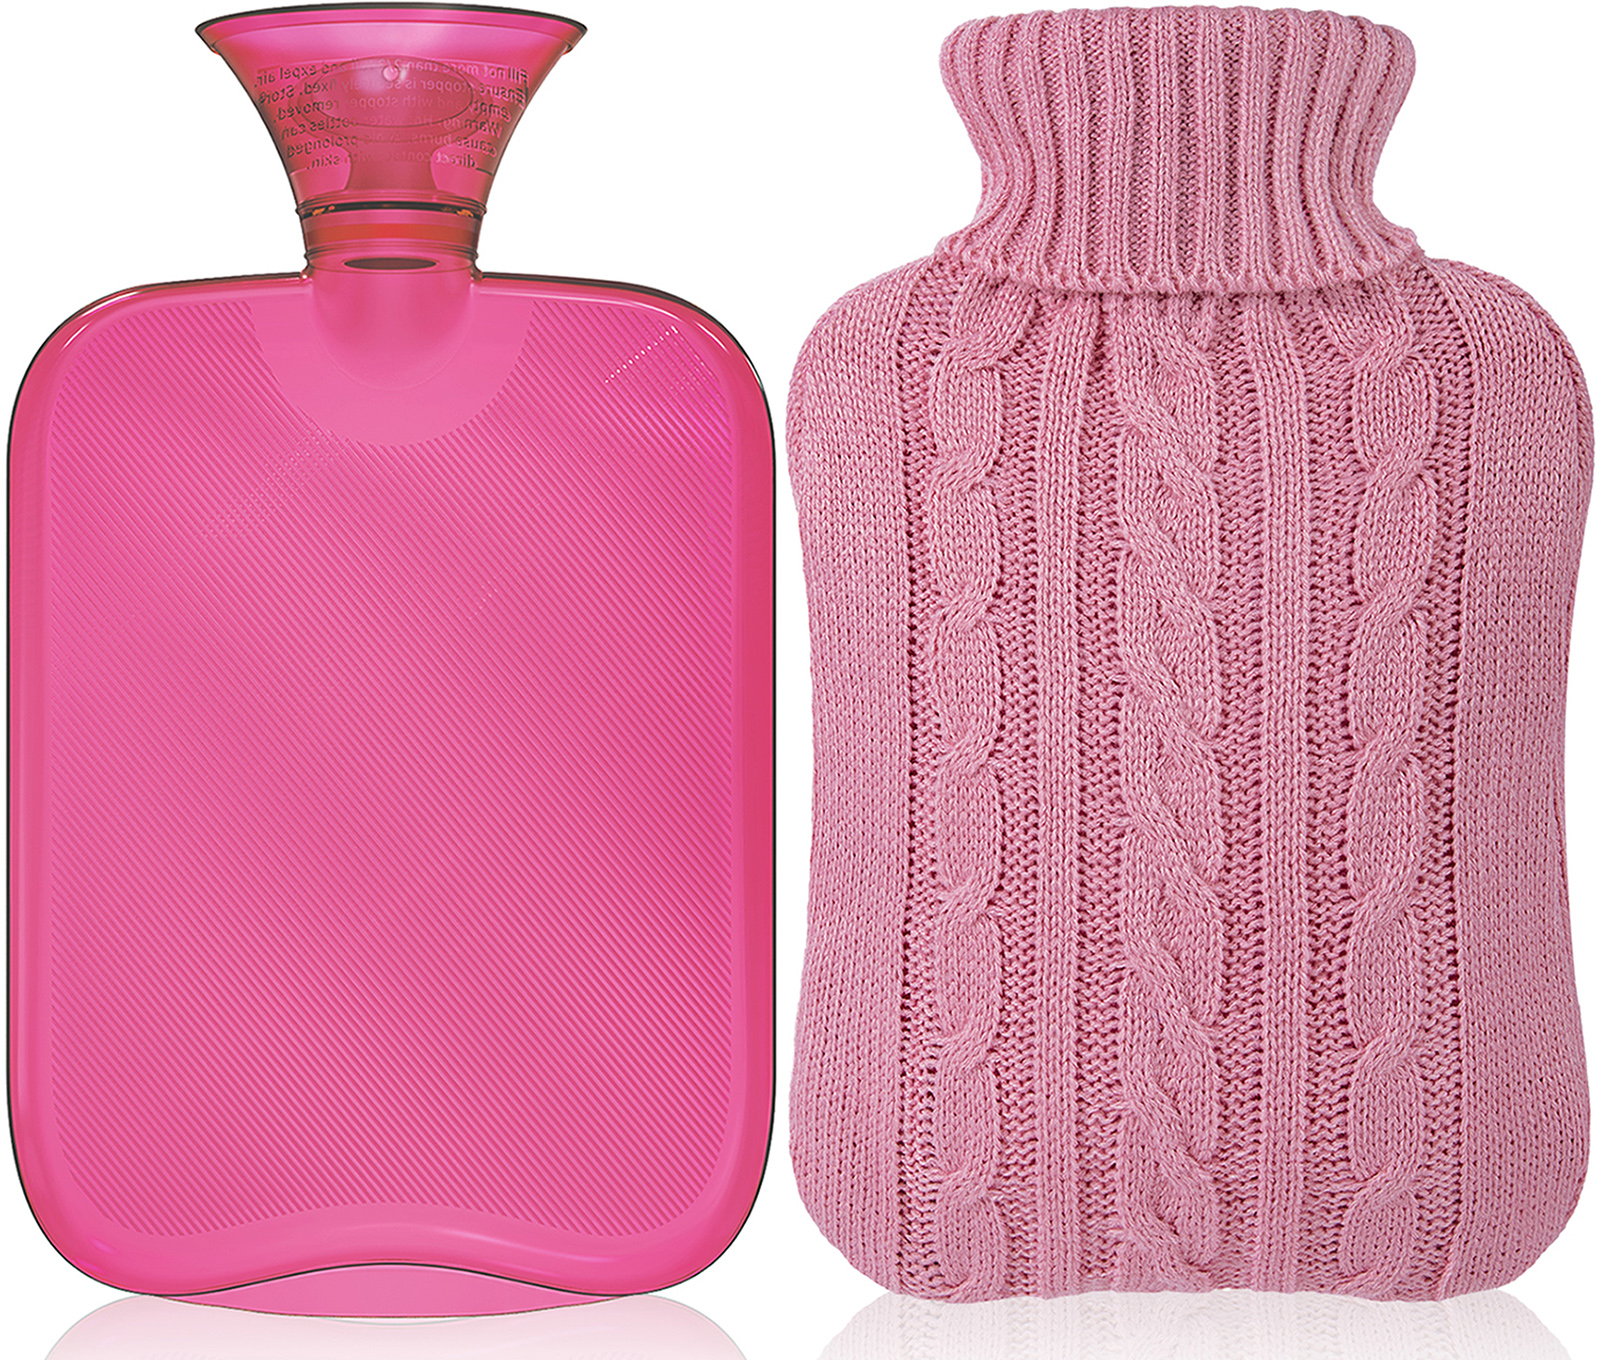 Attmu Hot Water Bottle with Cover Knitted, Transparent Hot Water Bag 2 Liter - Pink